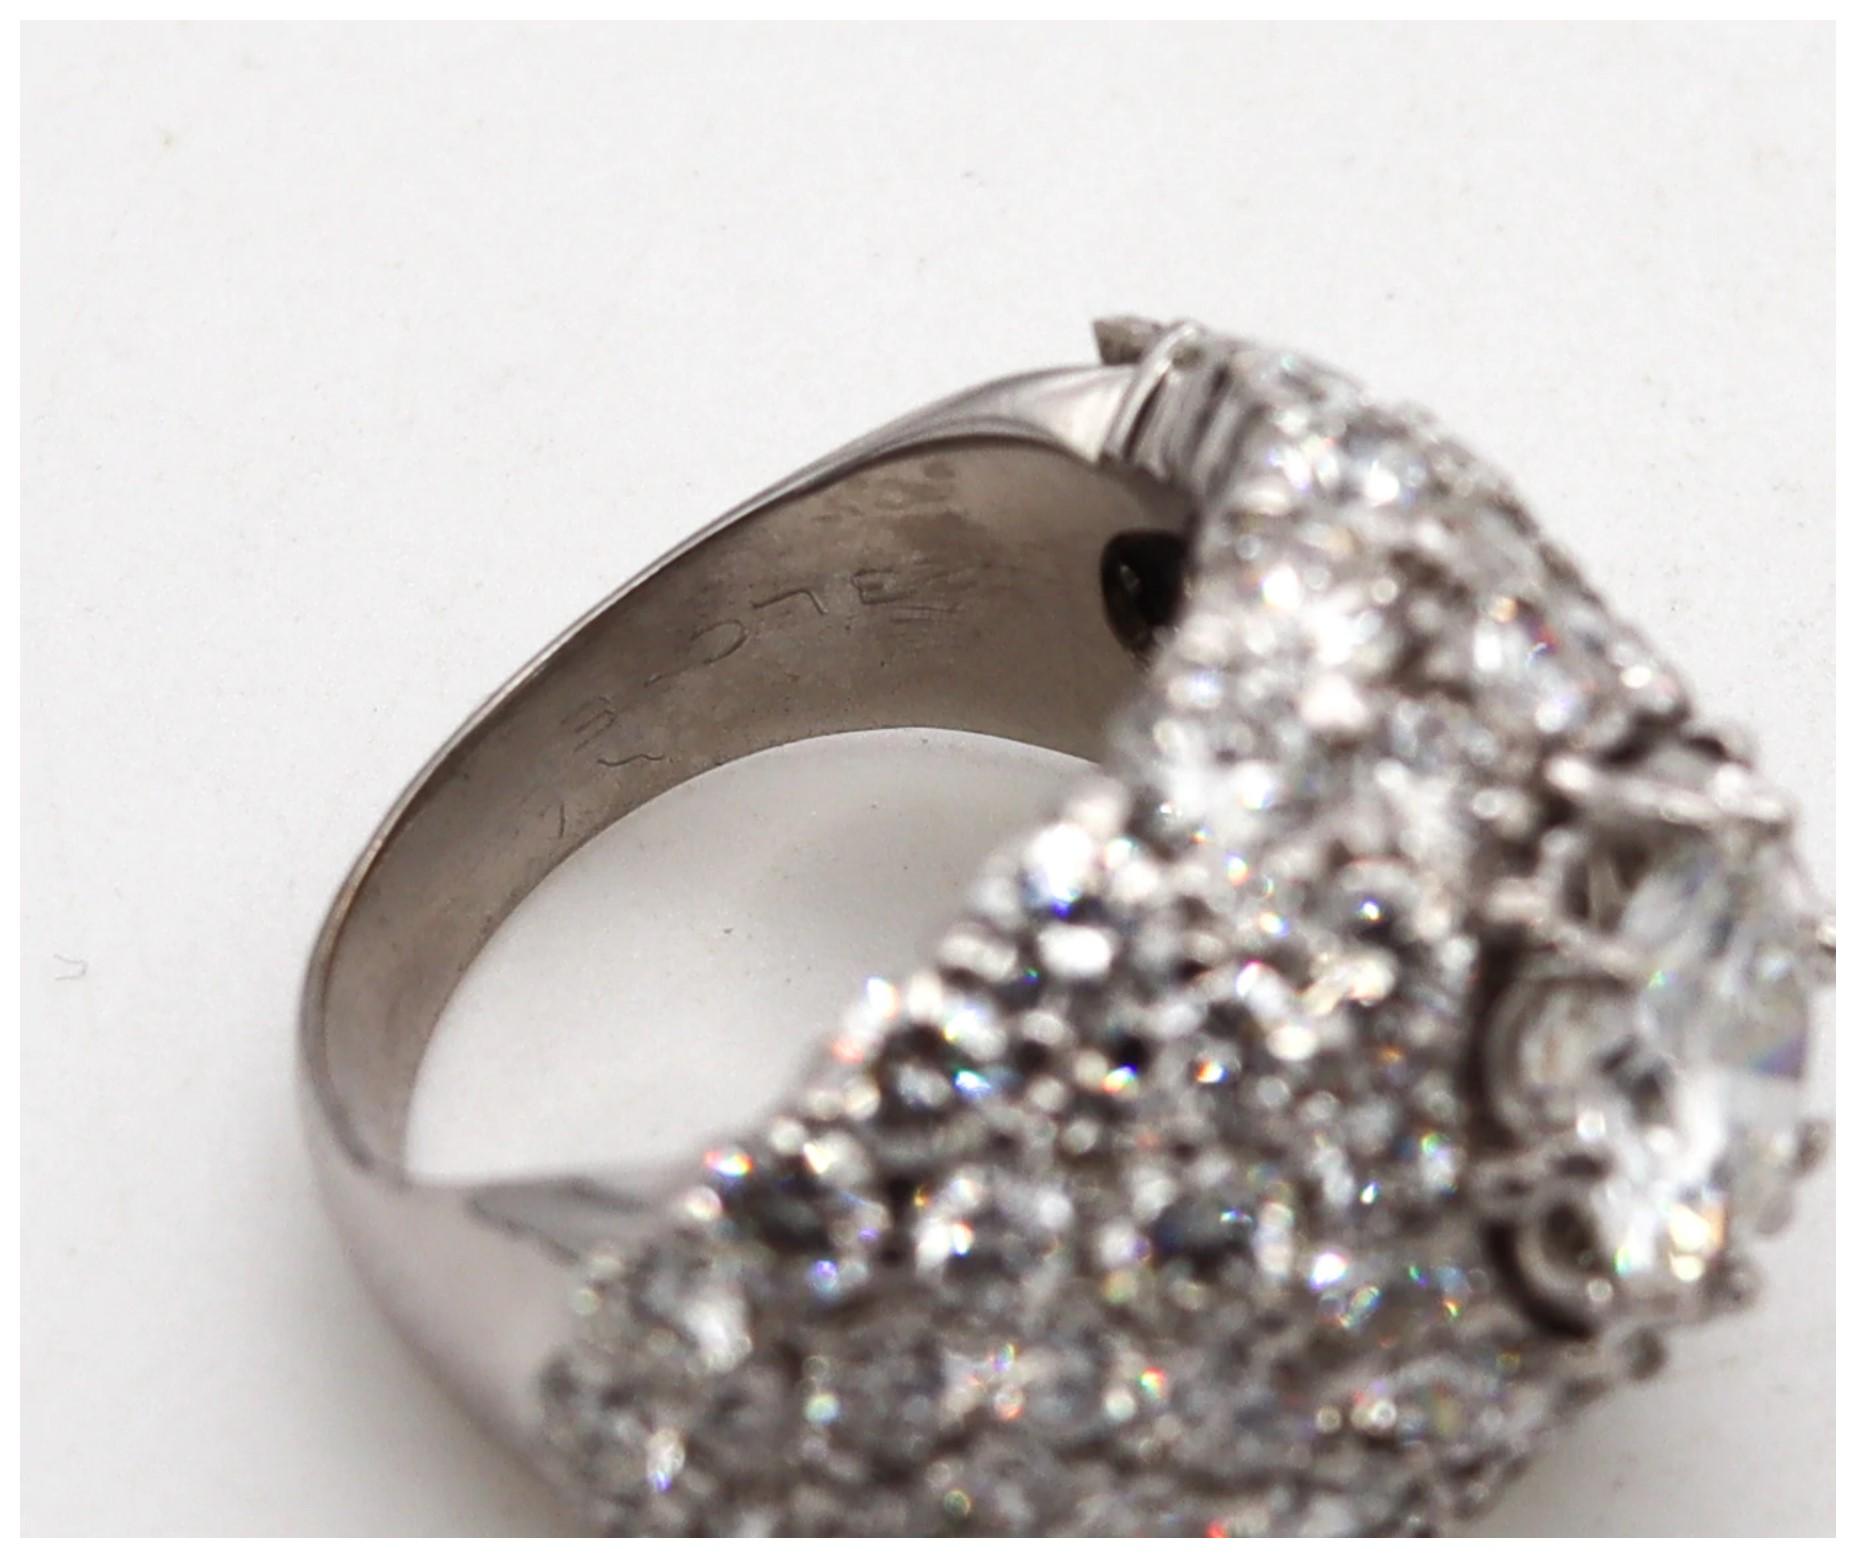 Yanes Exceptional Platinum Cluster Cocktail Ring Gia Certified 10.16 Ctw Diamond In Excellent Condition For Sale In Miami, FL